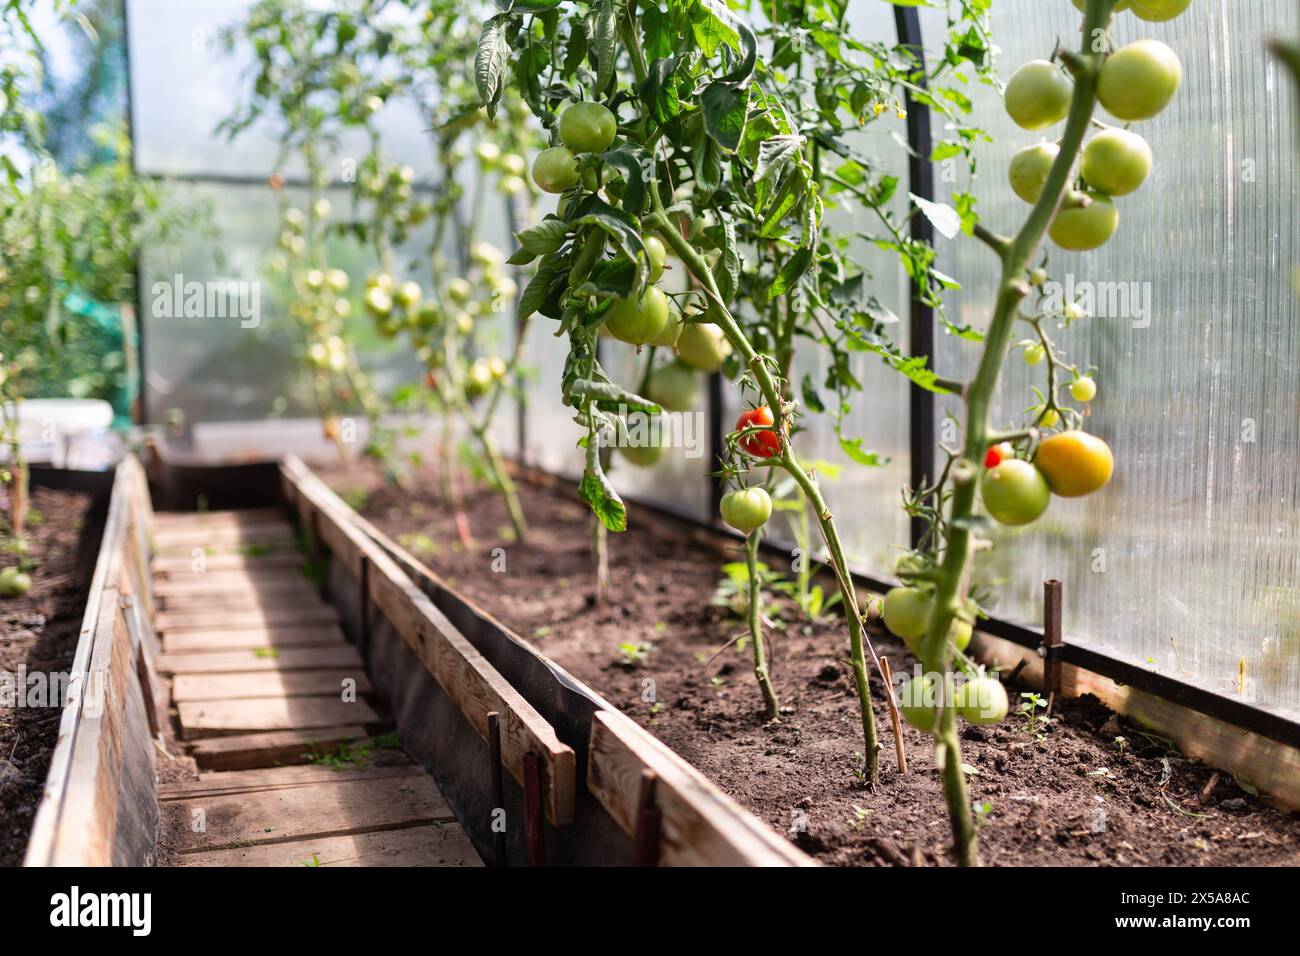 Lush green tomato plants bearing both ripe and unripe organic tomatoes inside a sunlit greenhouse, illustrating sustainable agriculture practices Stock Photo